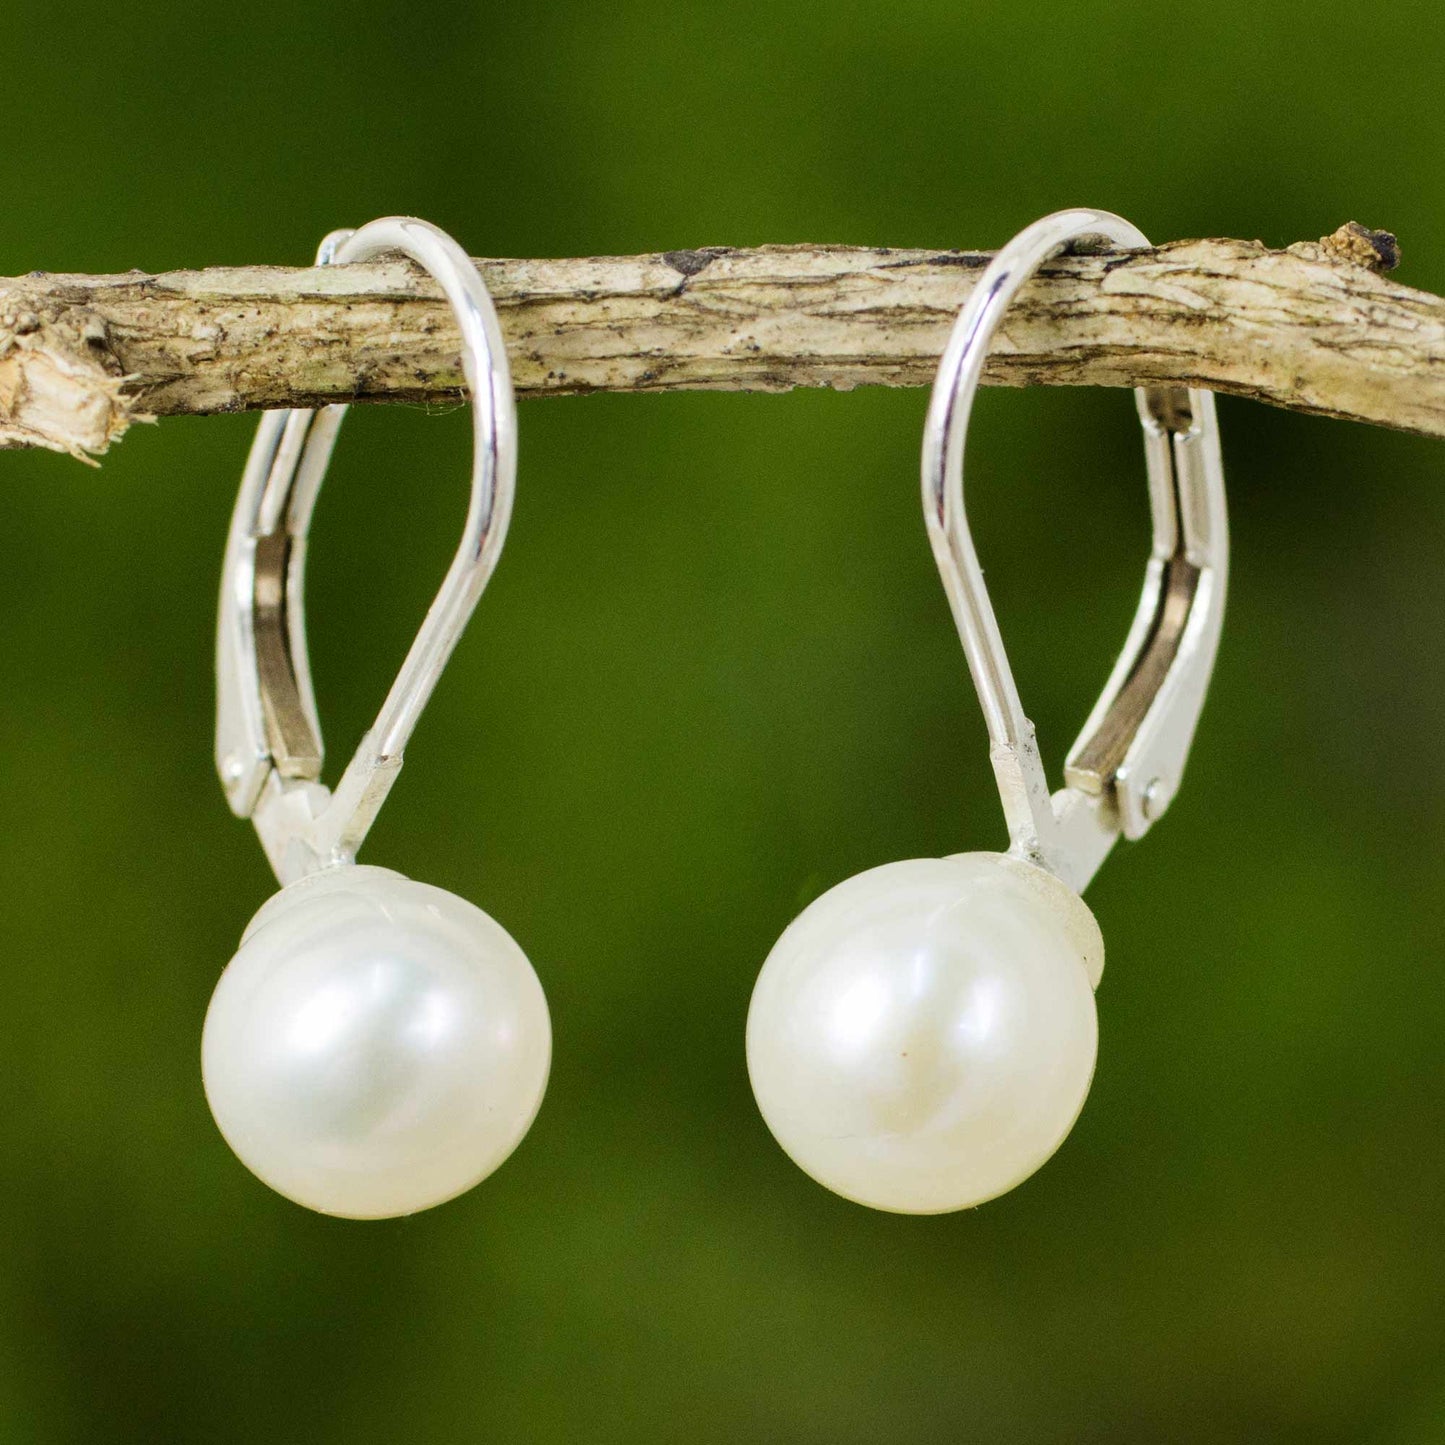 Pure Lily Pearl & Silver Drop Earrings